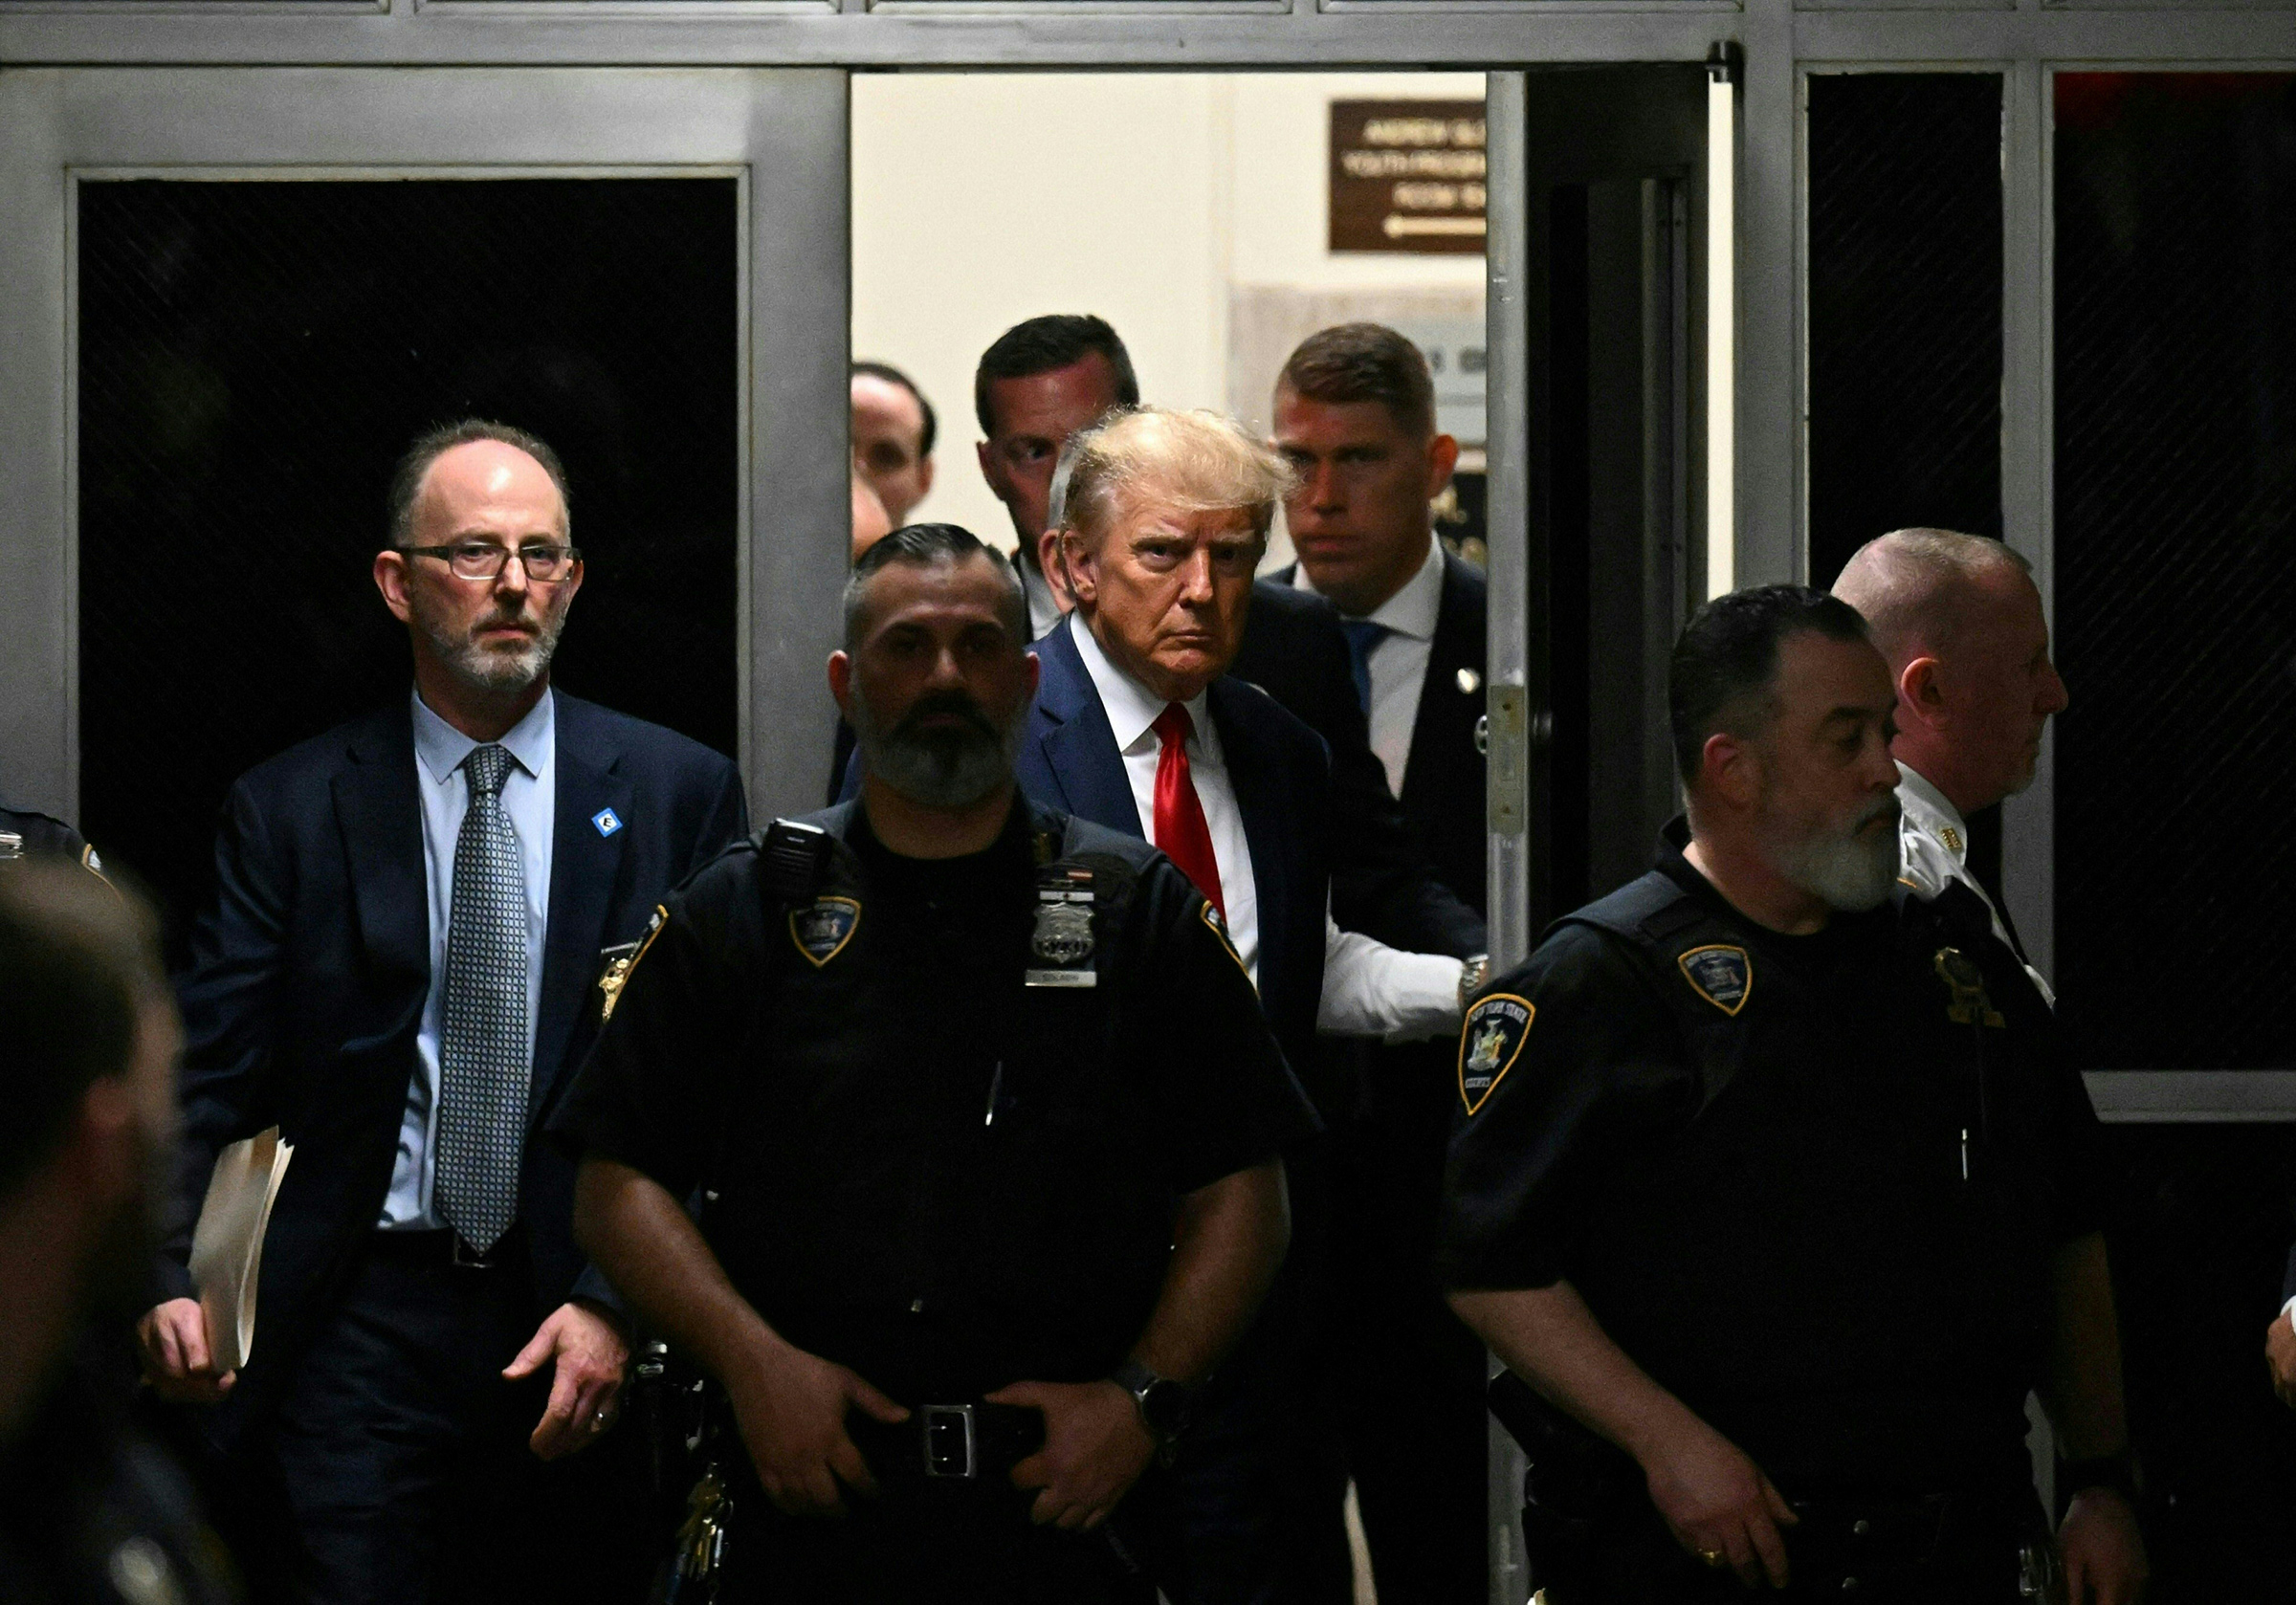 Former President Trump makes his way inside the Manhattan Criminal Courthouse in New York on April 4. (Ed Jones—AFP/Getty Images)